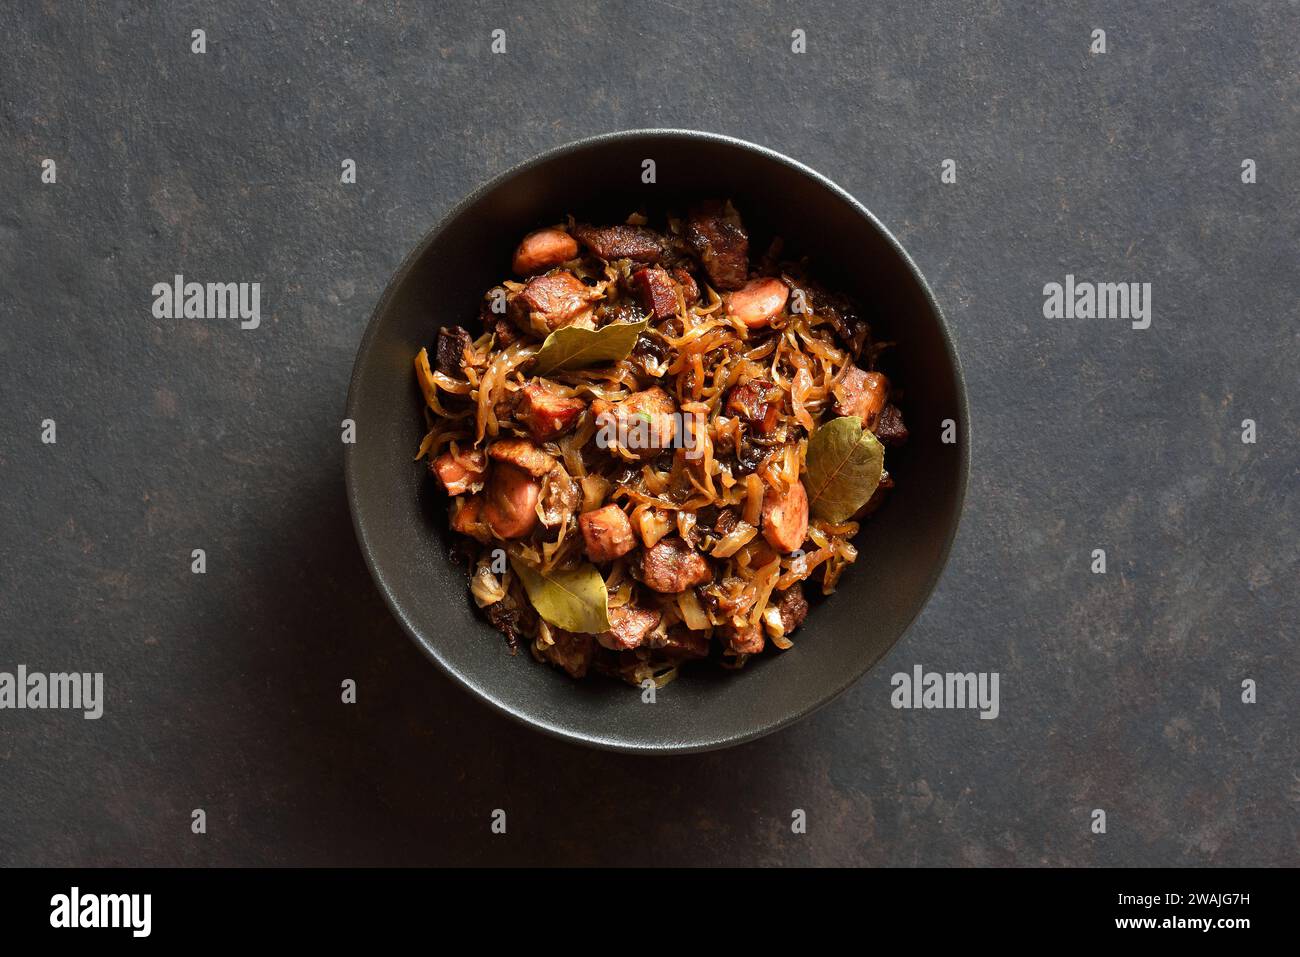 Polish Bigos in bowl over dark stone background. Stewed cabbage with sauerkraut, mushrooms, smoked meats and spices. Top view, flat lay Stock Photo